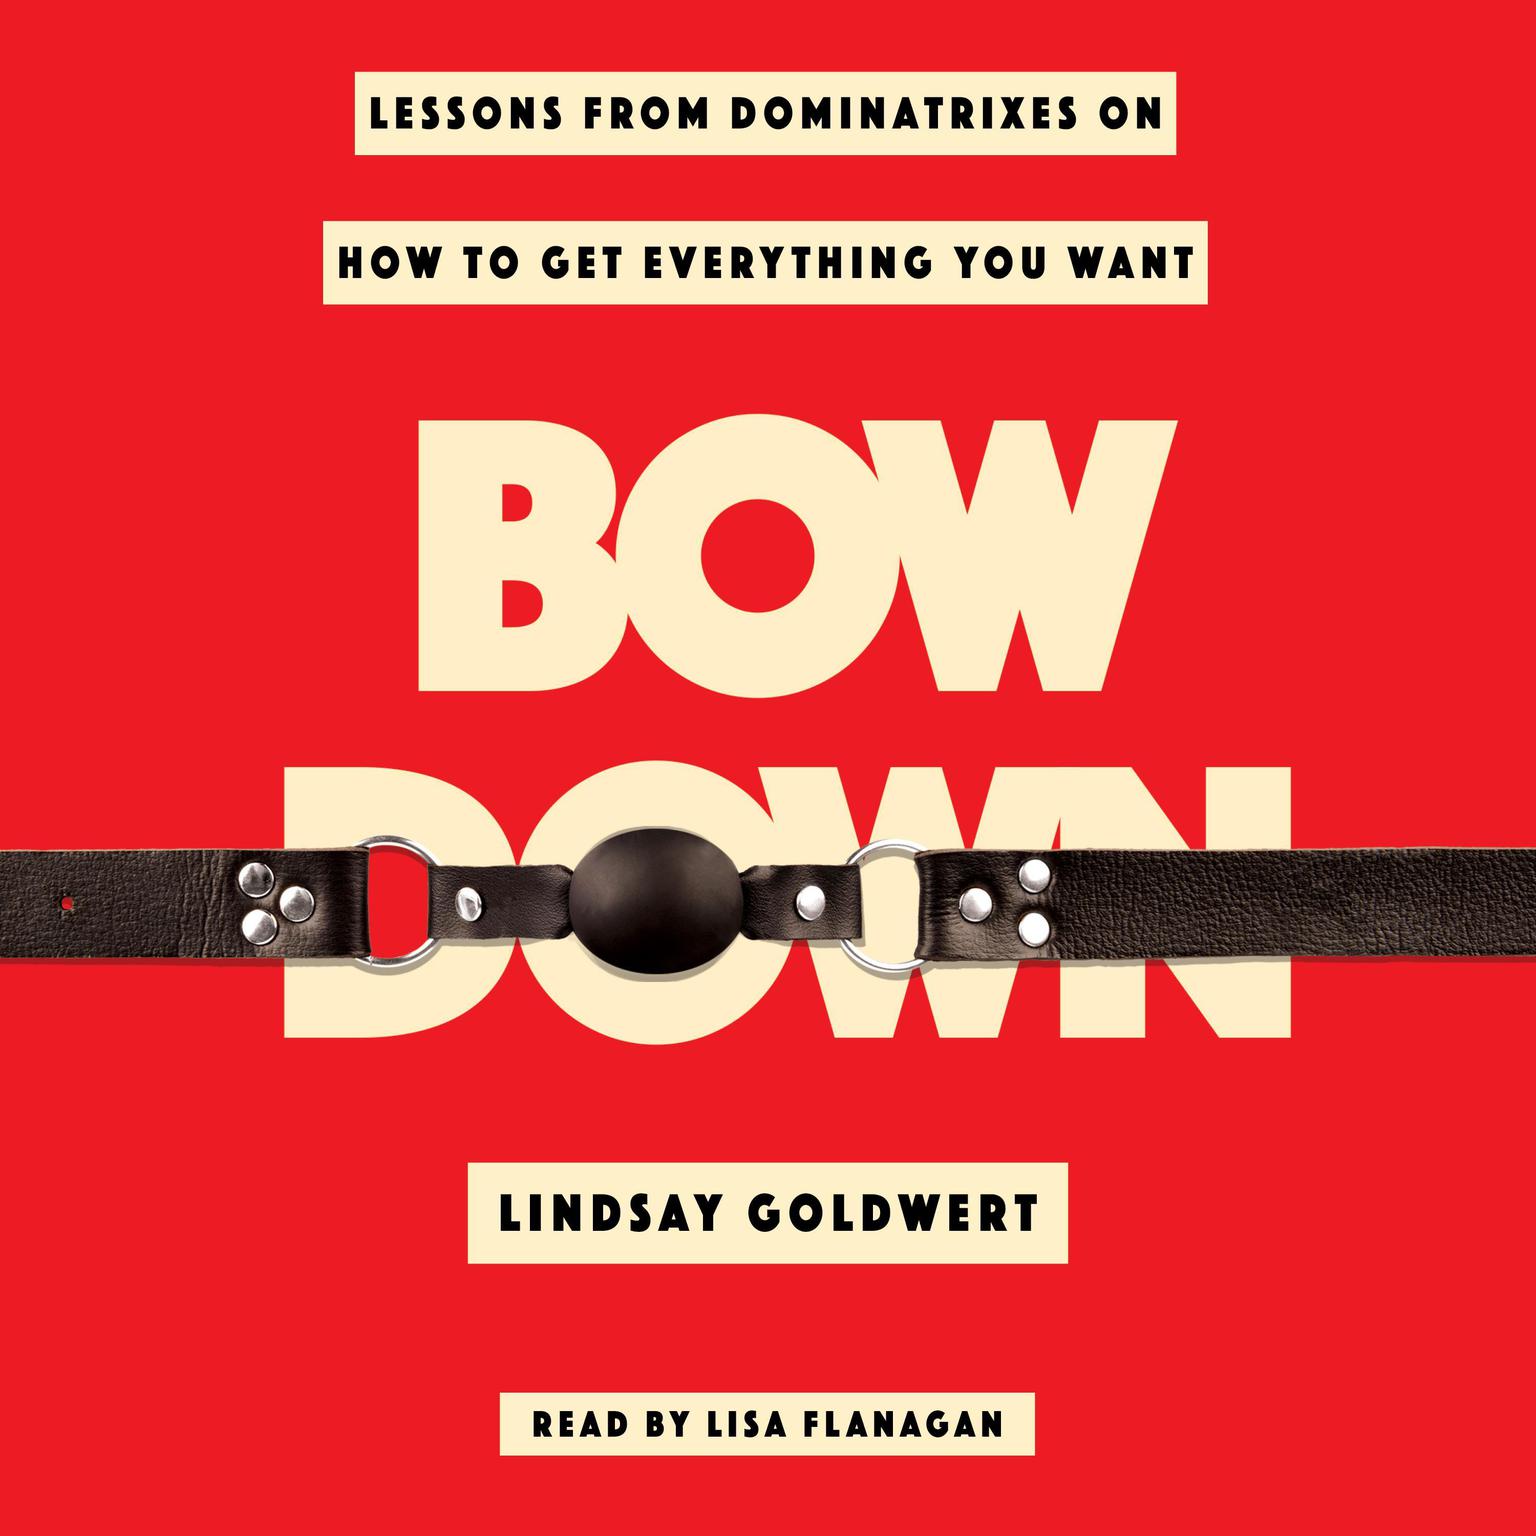 Bow Down: Lessons from Dominatrixes on How to Get Everything You Want Audiobook, by Lindsay Goldwert